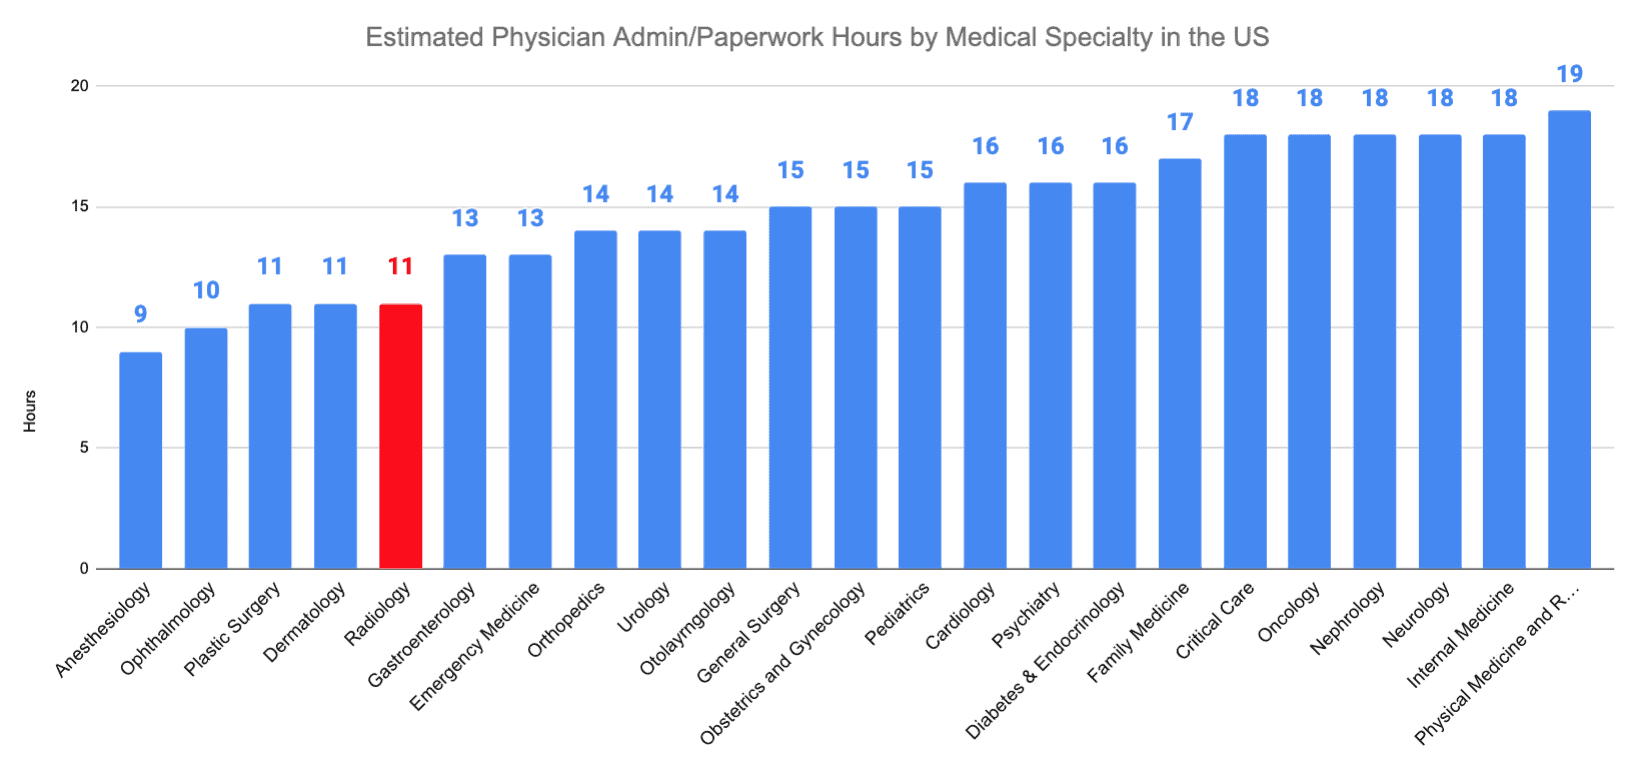 Radiology vs. Infectious Disease Estimated Physician Admin/Paperwork Hours by Medical Specialty in the US